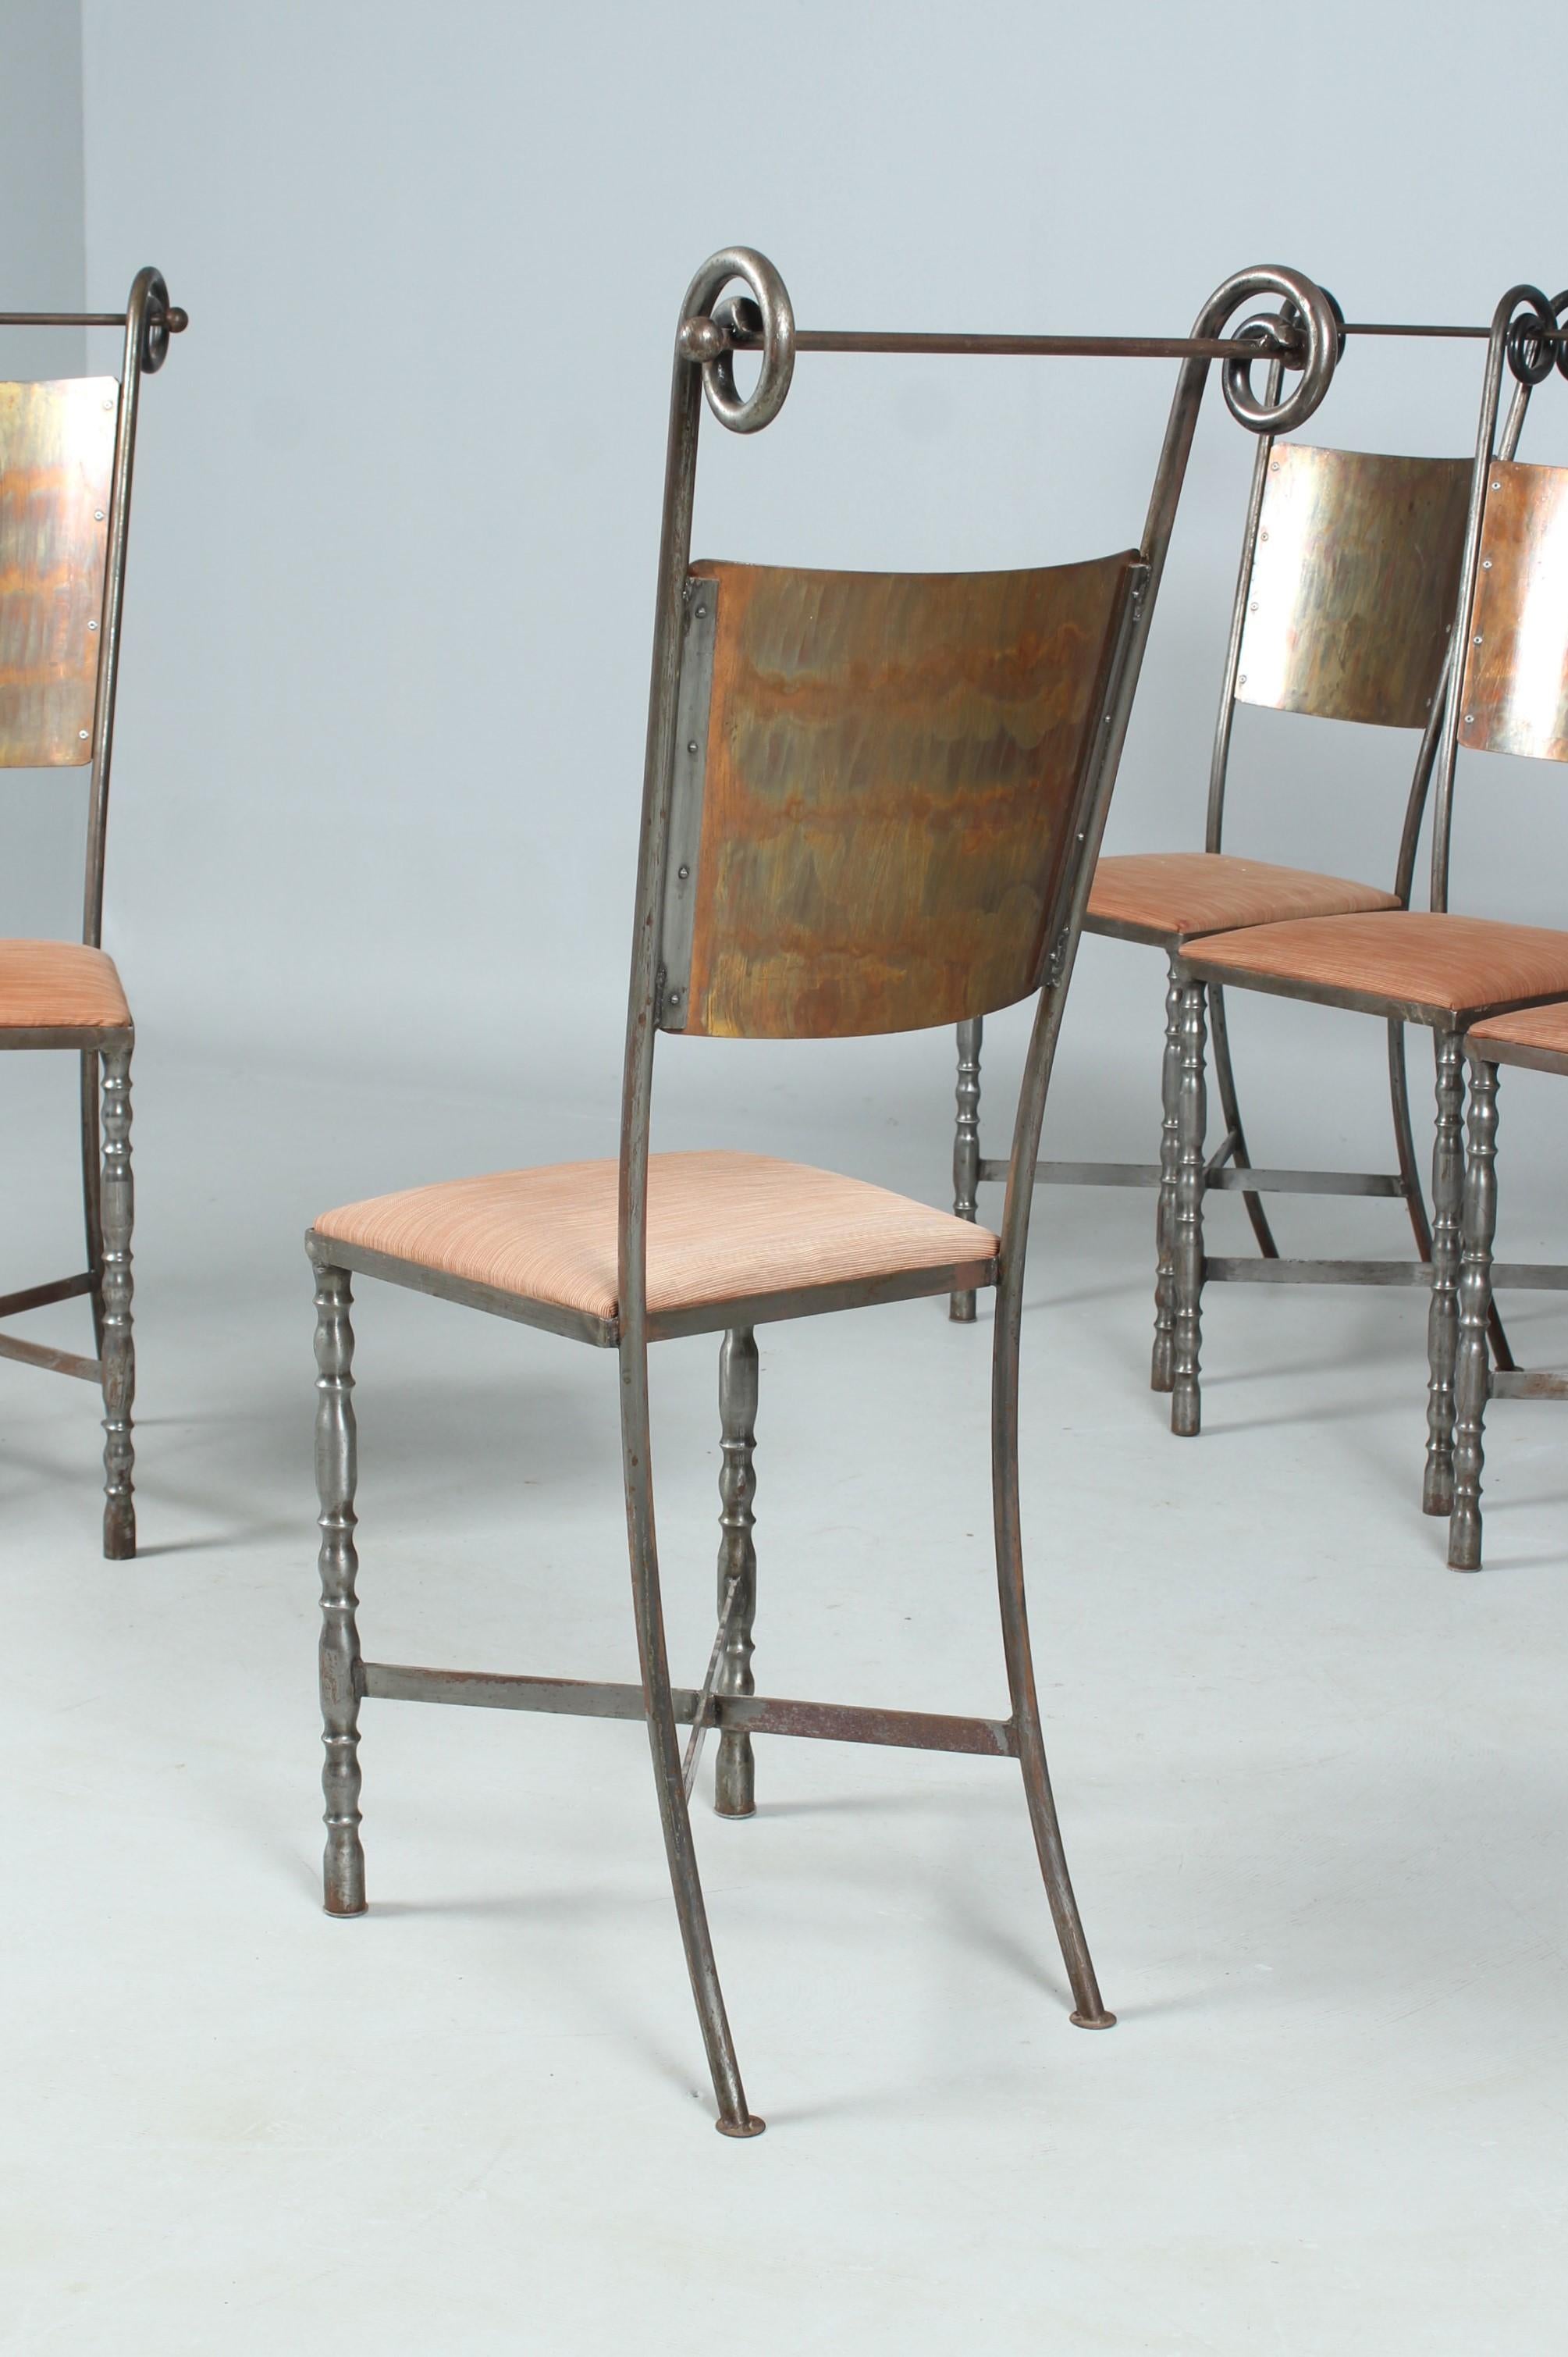 Set of 8 Wrought Iron Chairs, Dining Chairs, 1980s? For Sale 1